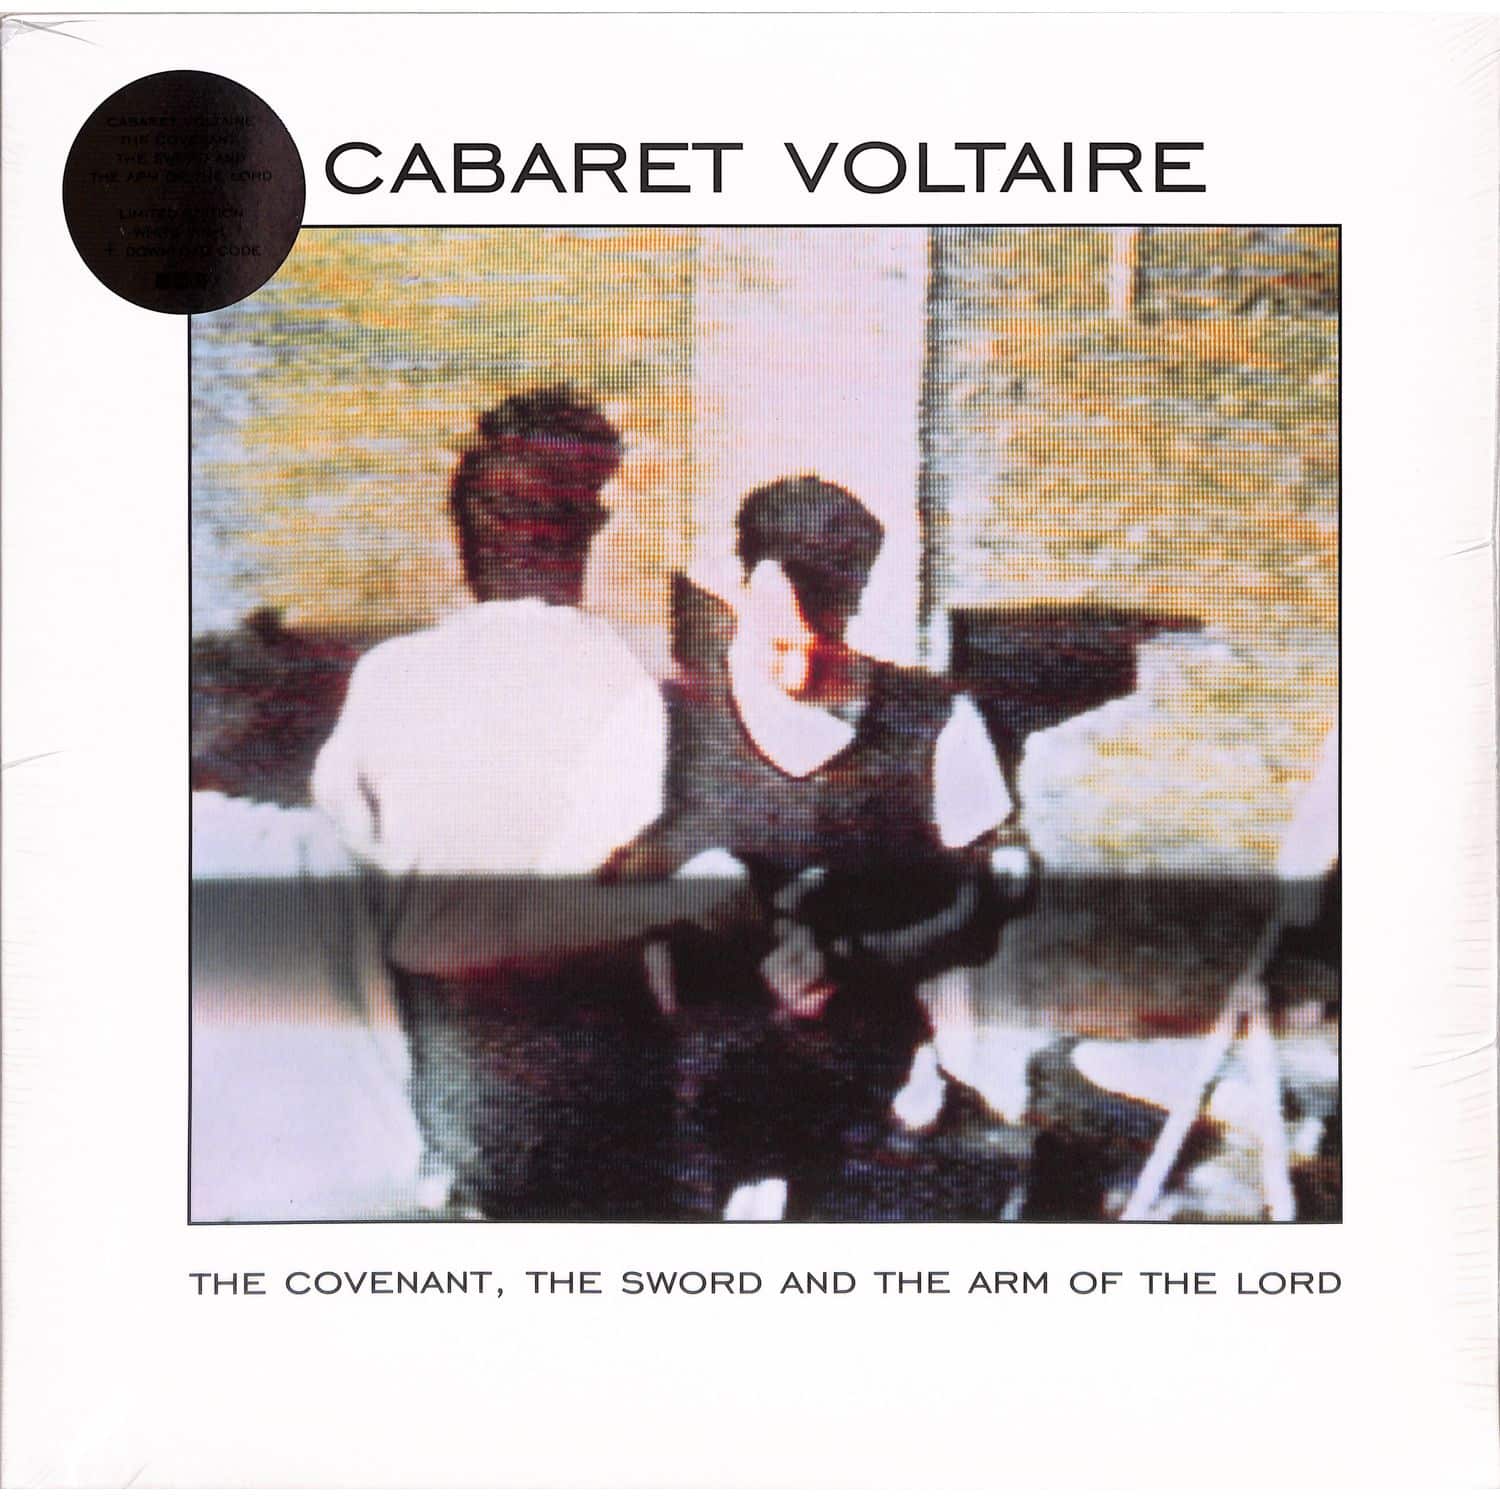 Cabaret Voltaire - THE COVENANT, THE SWORD AND THE ARM OF THE LORD 